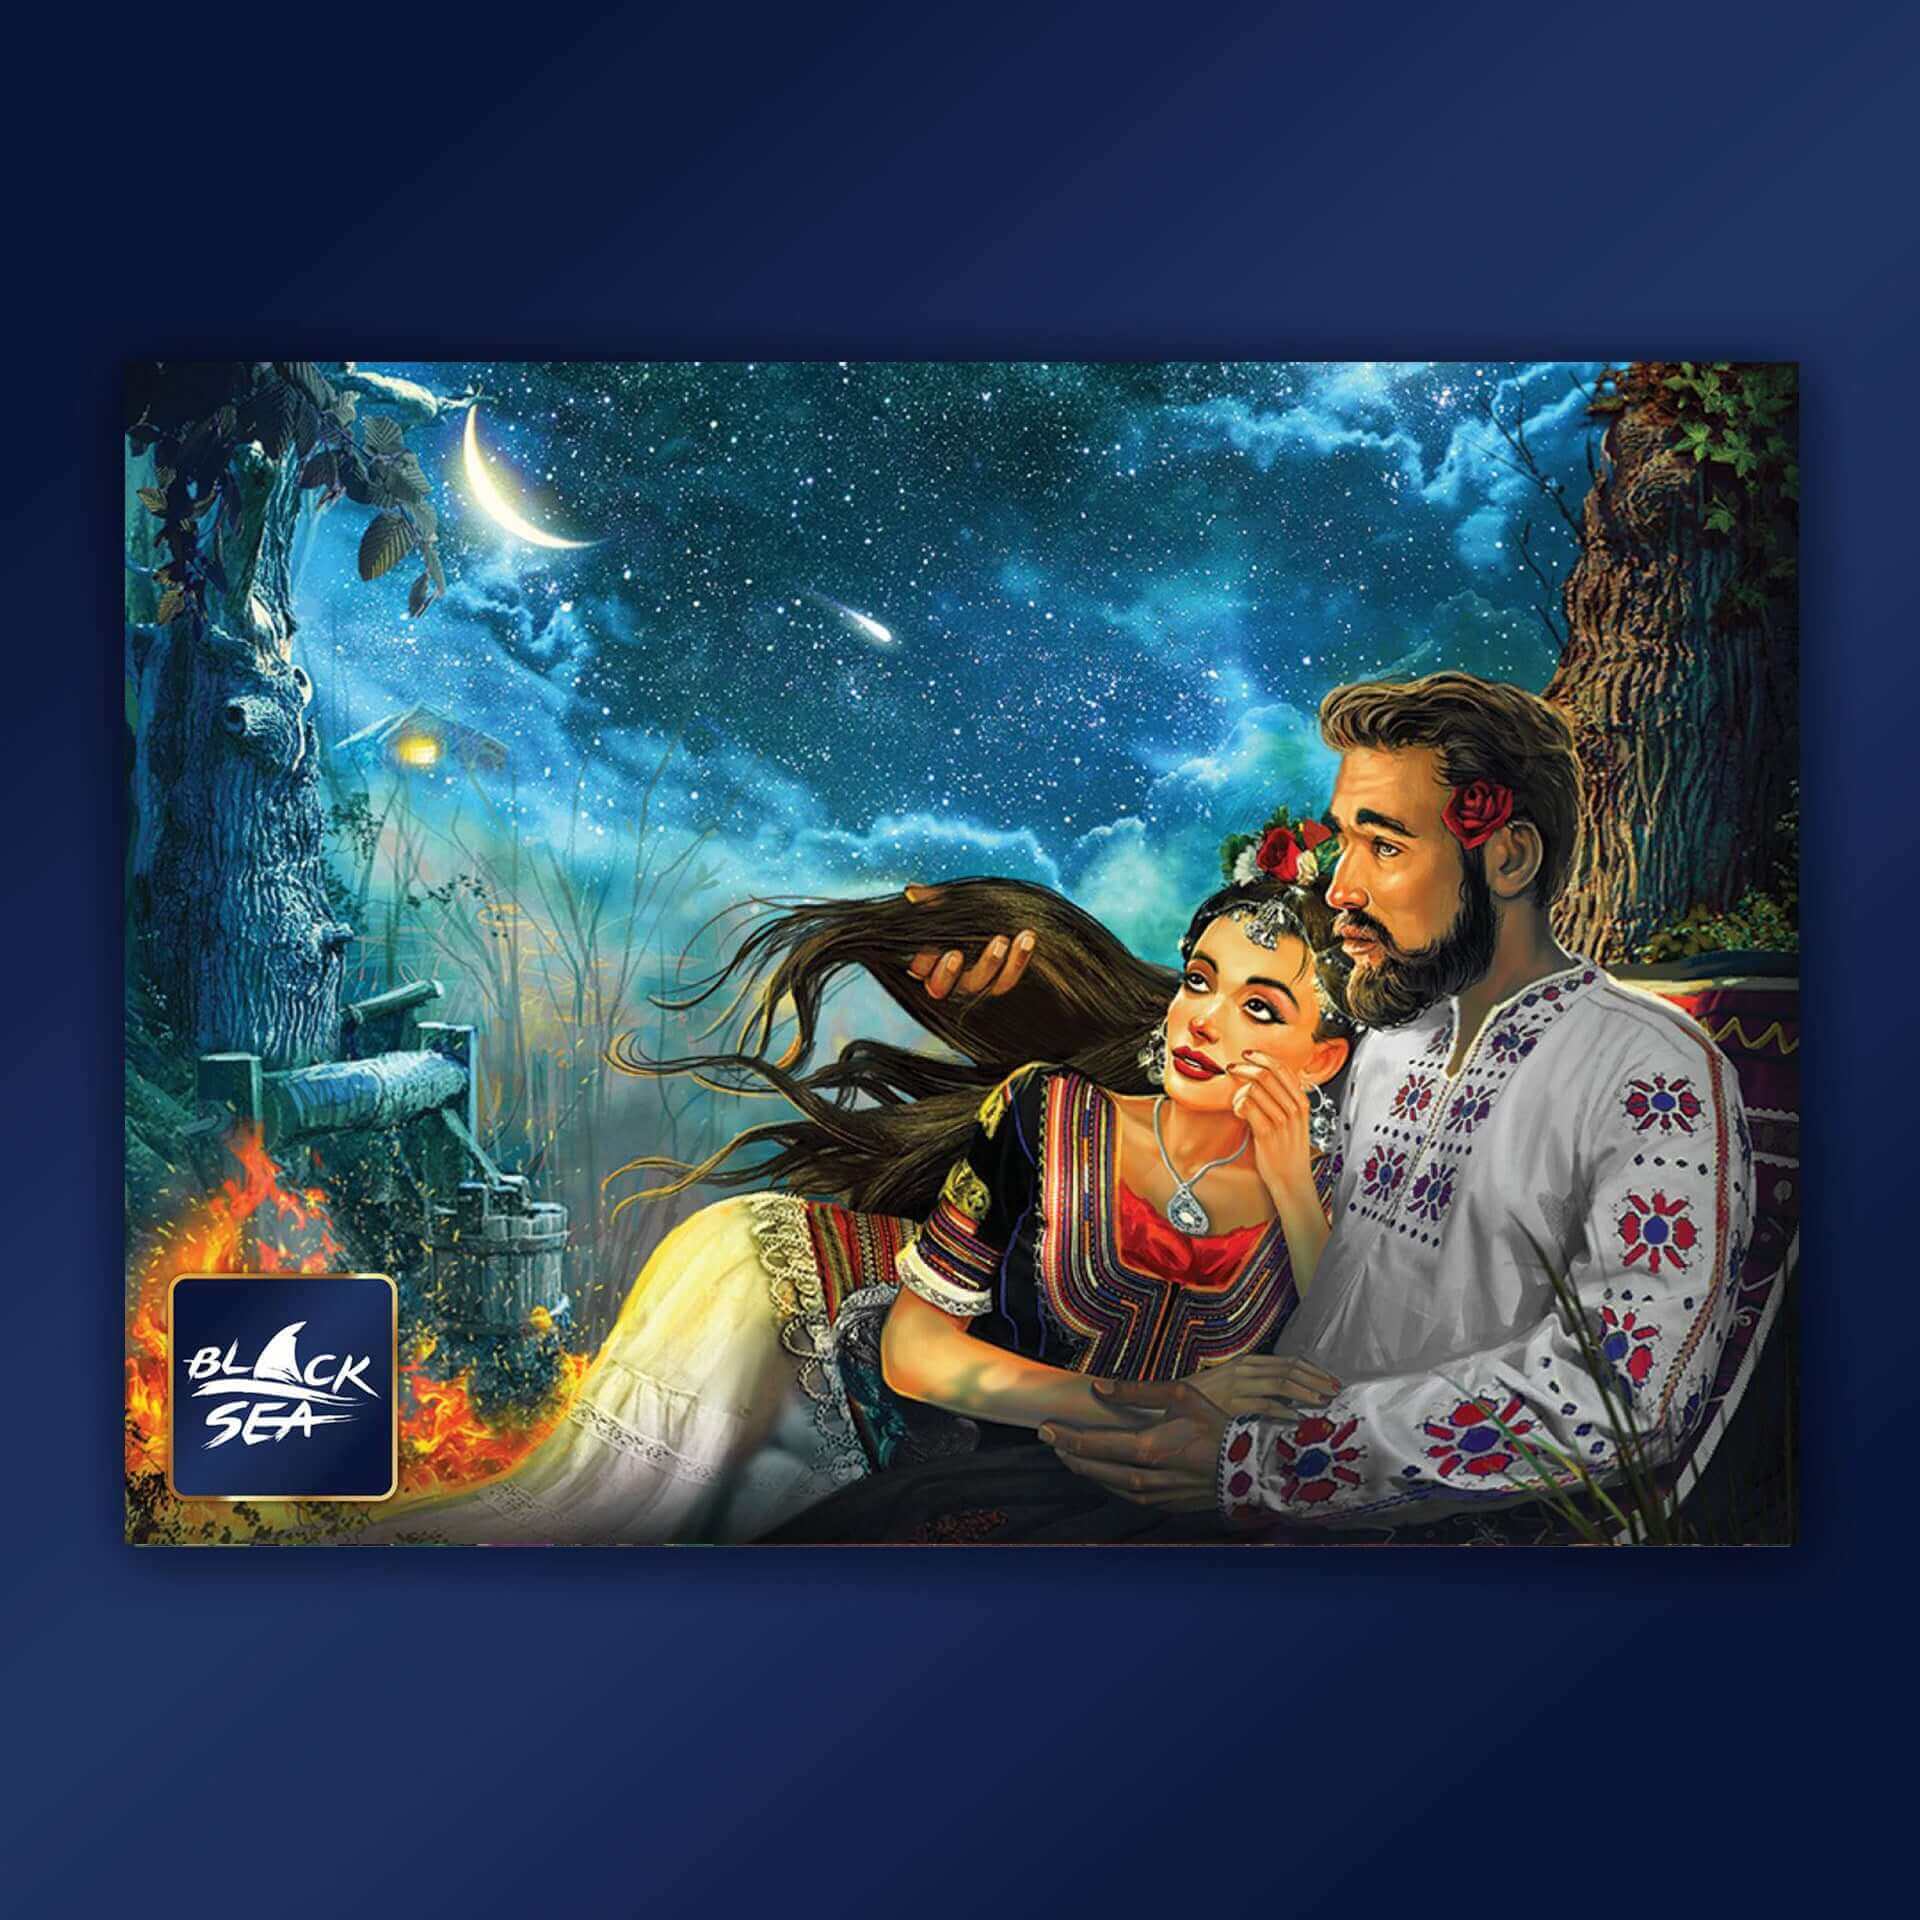 Puzzle Black Sea Premium 1000 pieces - Dream with Me, As the sun sets and the midnight crescent casts its magic veil across the world, every twinkling star turns into a dream, a sacred longing for love and kindness. Words are whispered in an embrace under